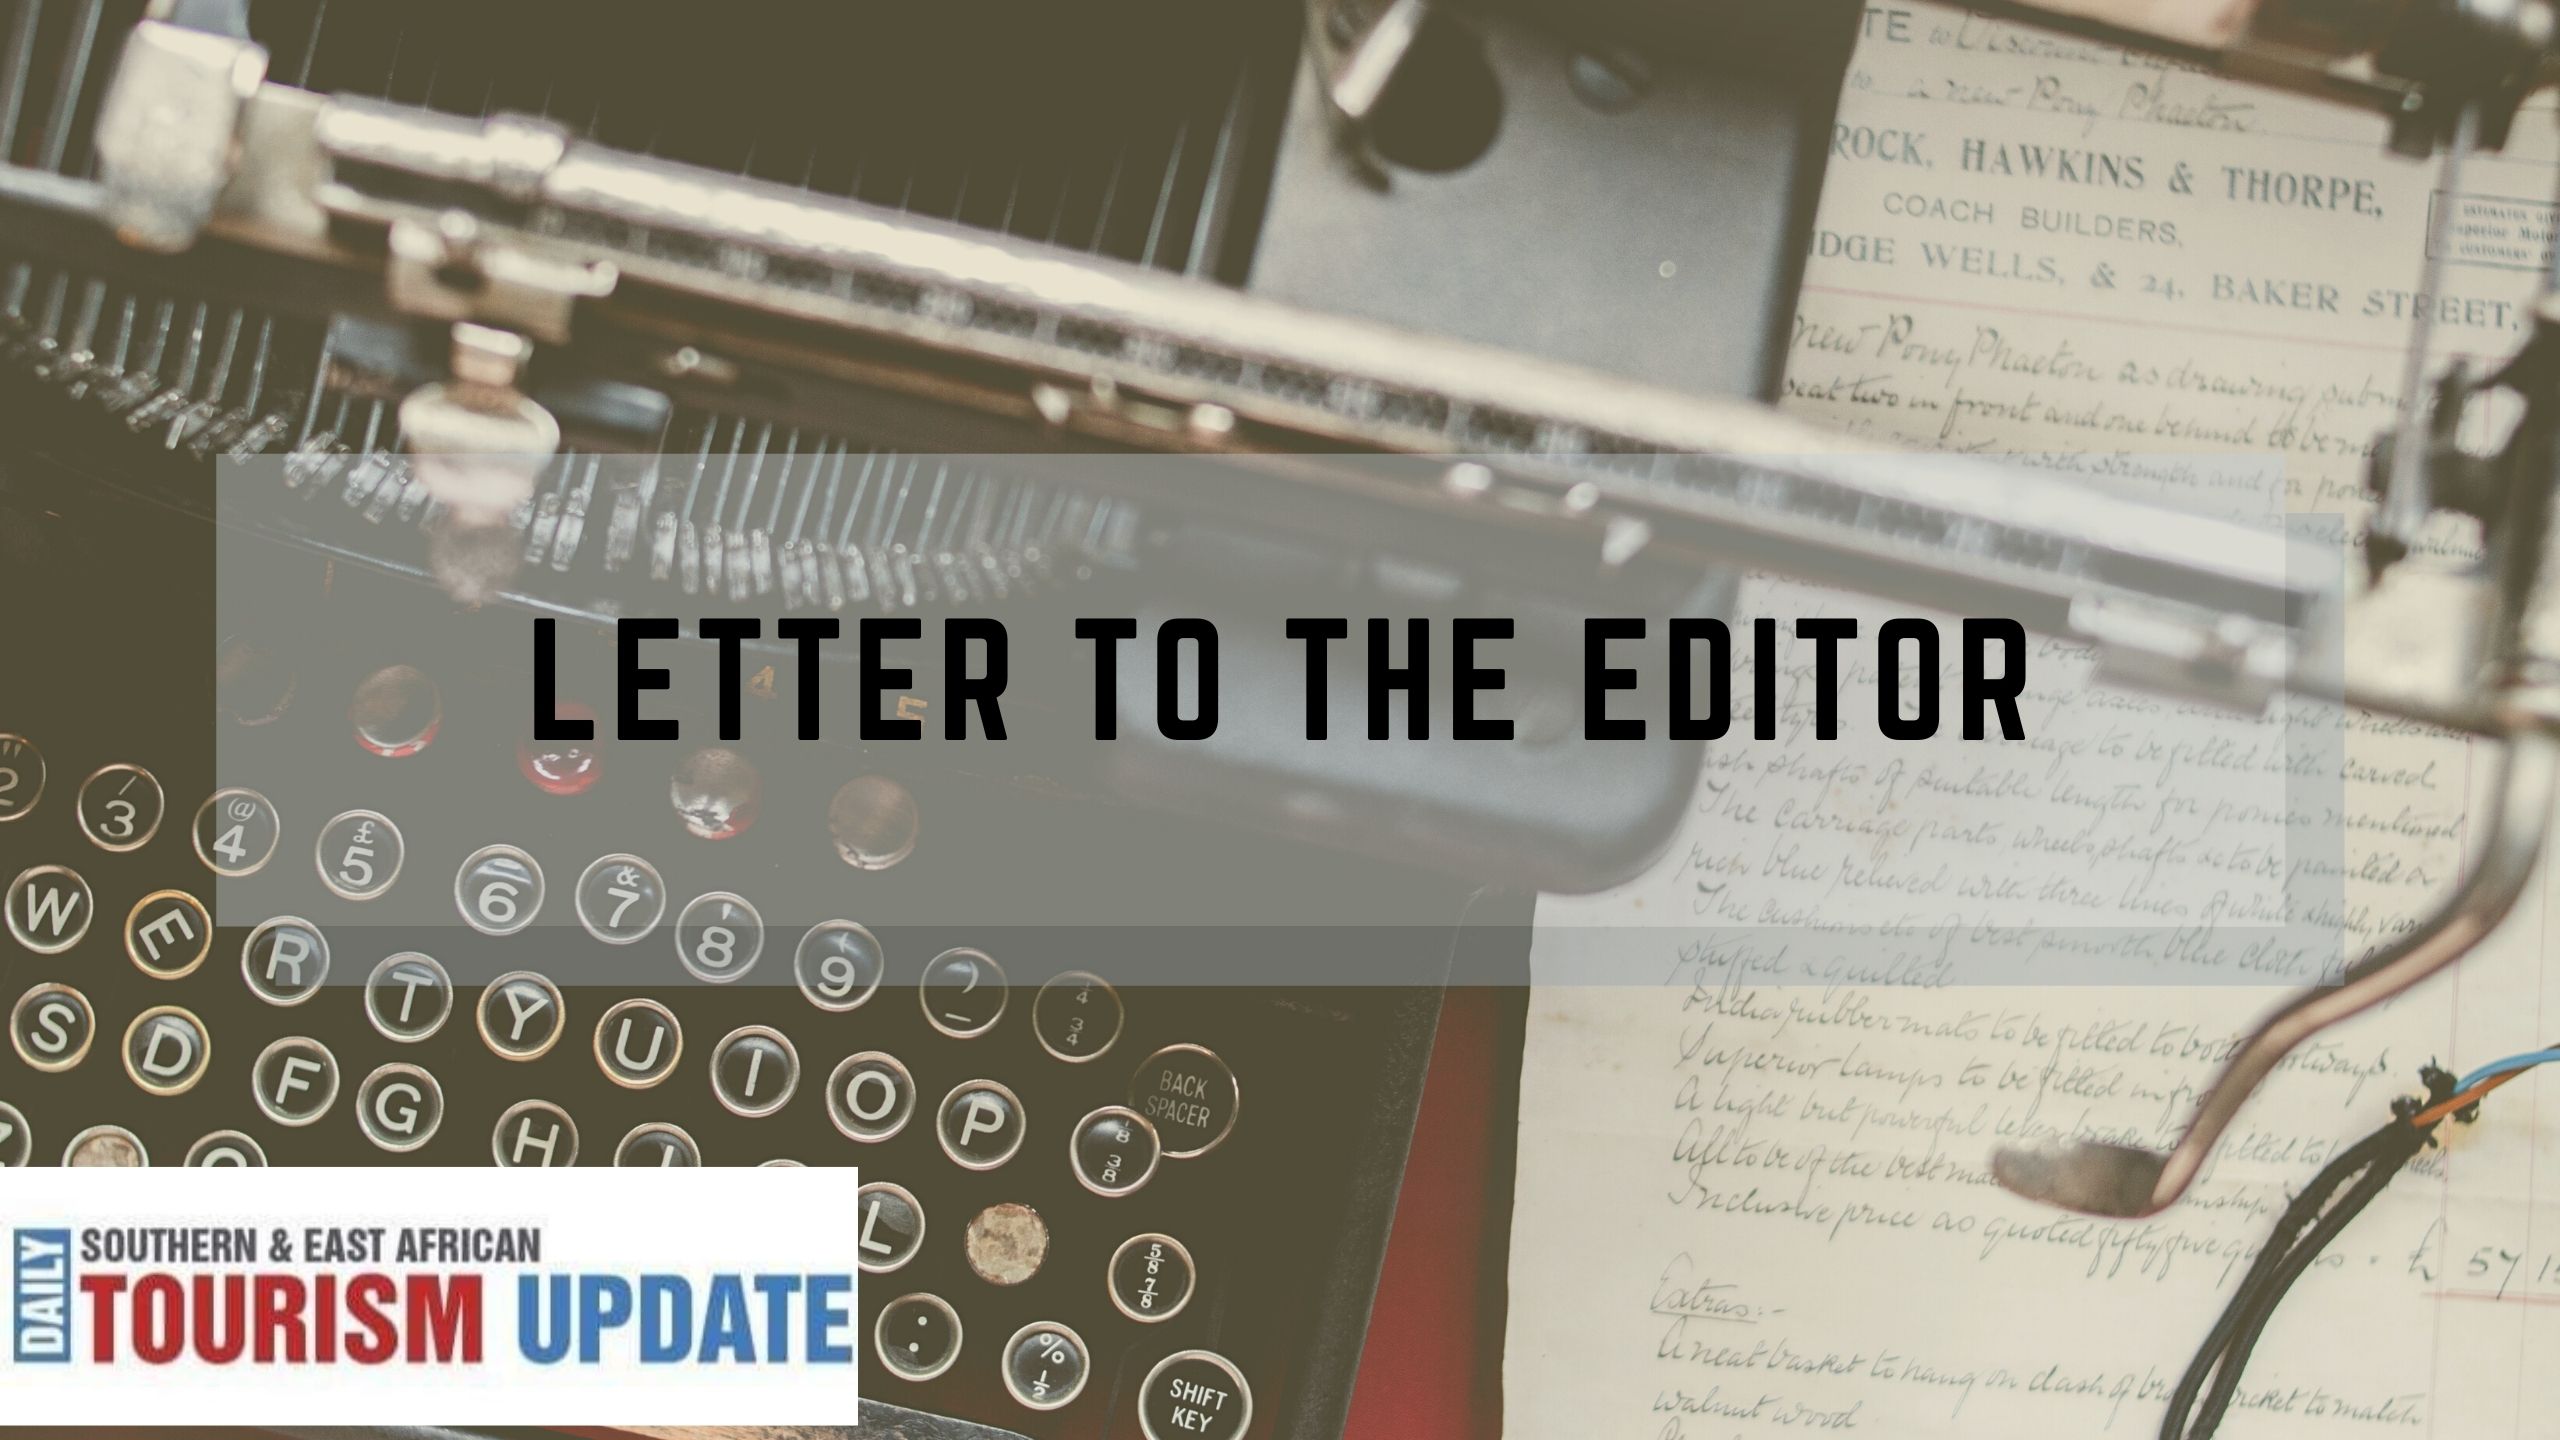 Letter to the editor: ‘Banish the negative, focus on the positive ...